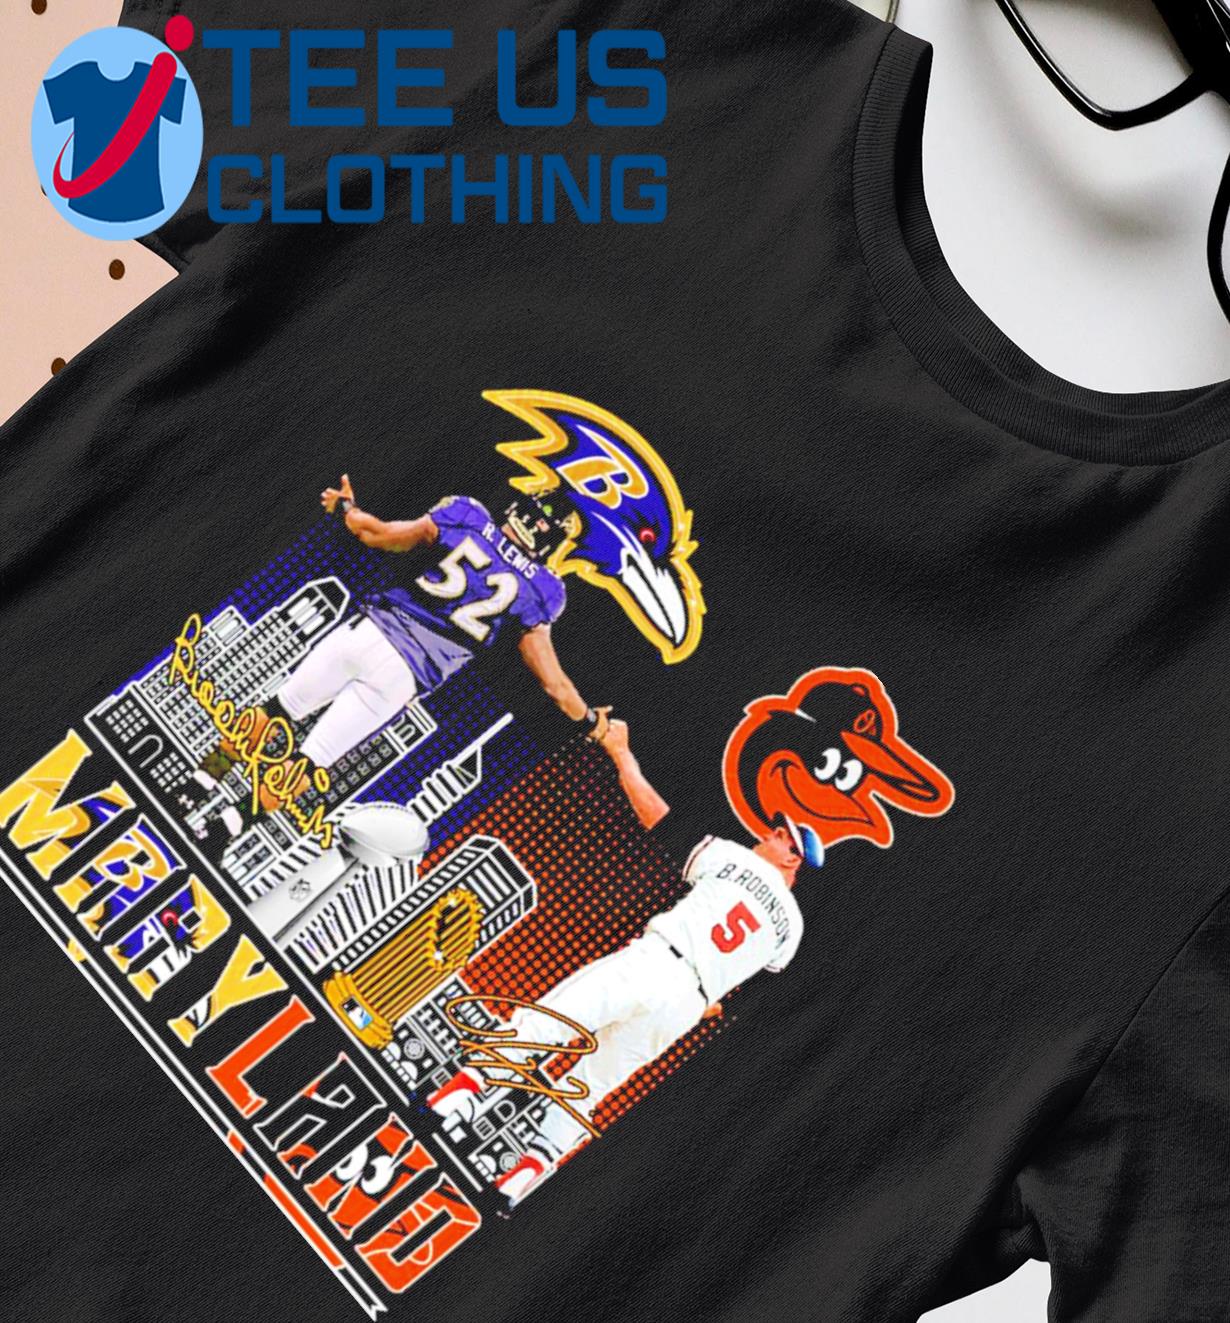 Baltimore ravens orioles lewis and robinson city champions shirt